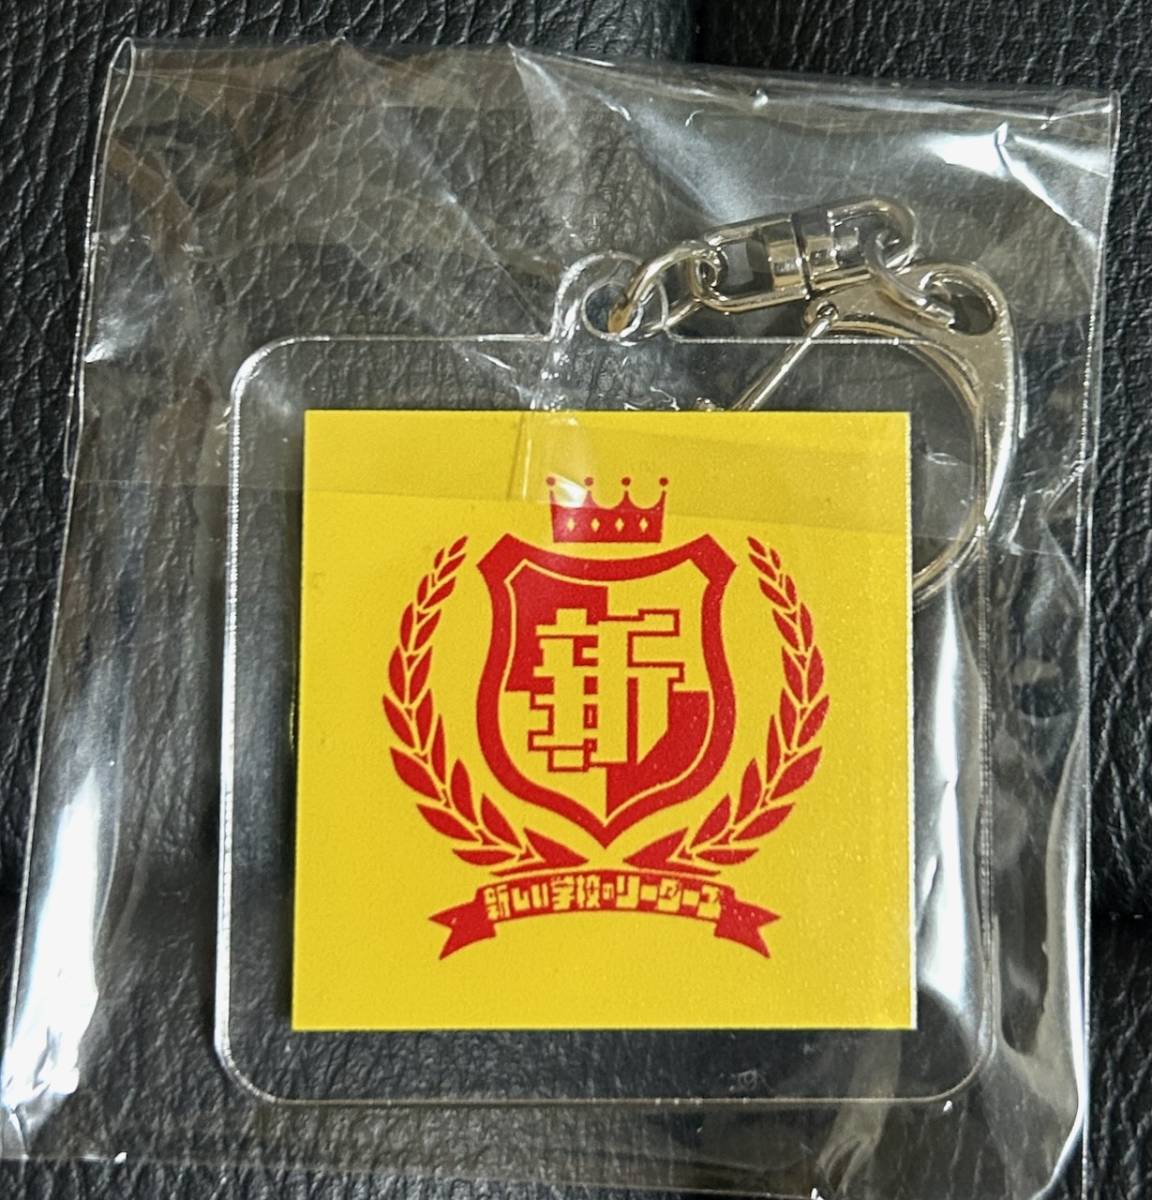 # new goods unopened / free shipping # new school. Leader zma human key holder tower record limitation 